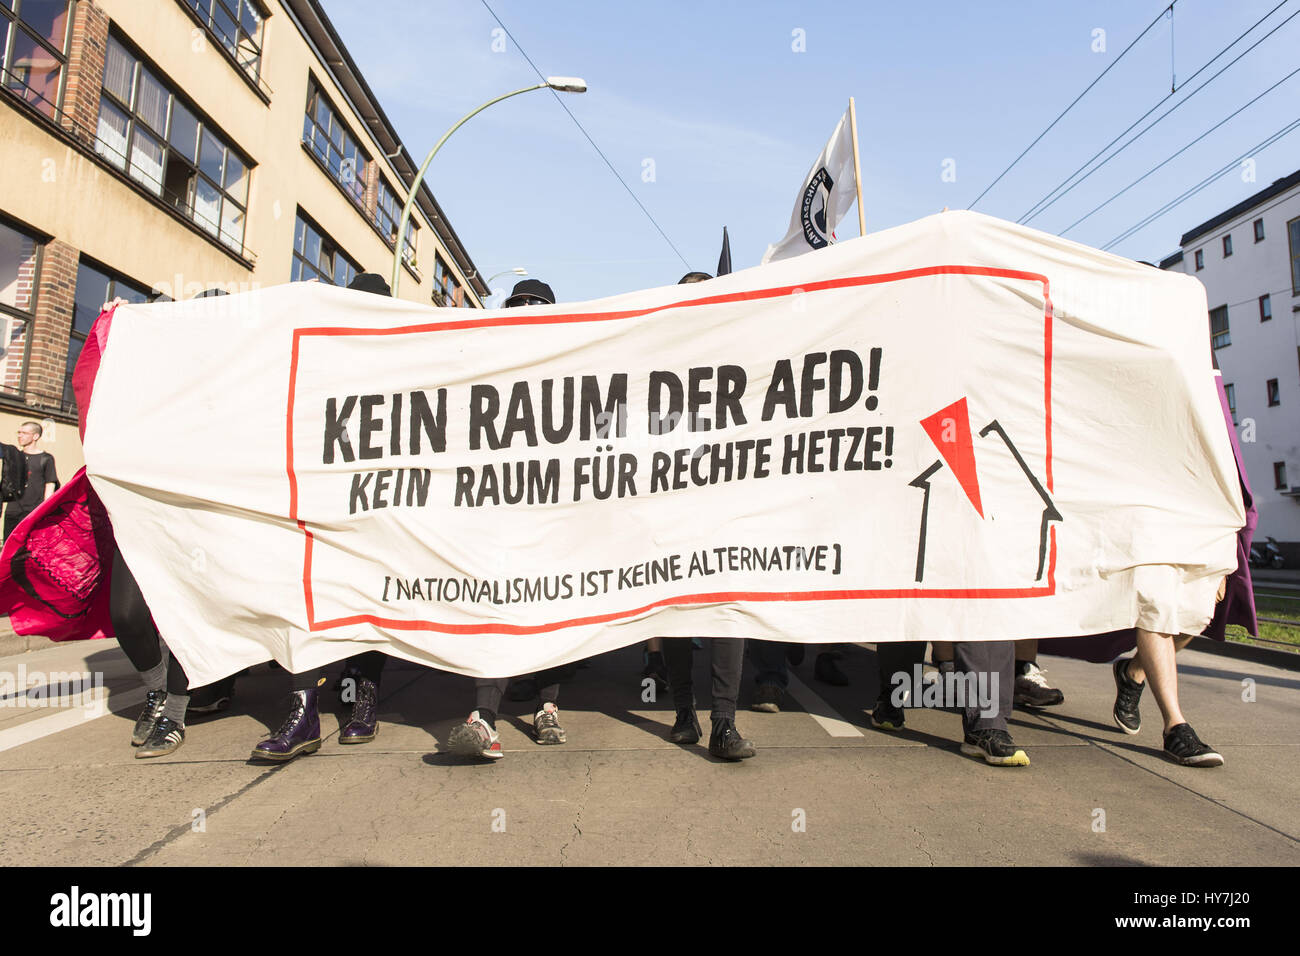 Berlin, Berlin, Germany. 1st Apr, 2017. Opponents of RECEP TAYYIP ERDOGAN, President of Turkey rally in an car parade through Berlin. Protesters holding signs with the inscription '#Hayir ', they demand a No vote in the constitutional referendum in Turkey, where Turks living in Germany are allowed to vote. Credit: Jan Scheunert/ZUMA Wire/Alamy Live News Stock Photo